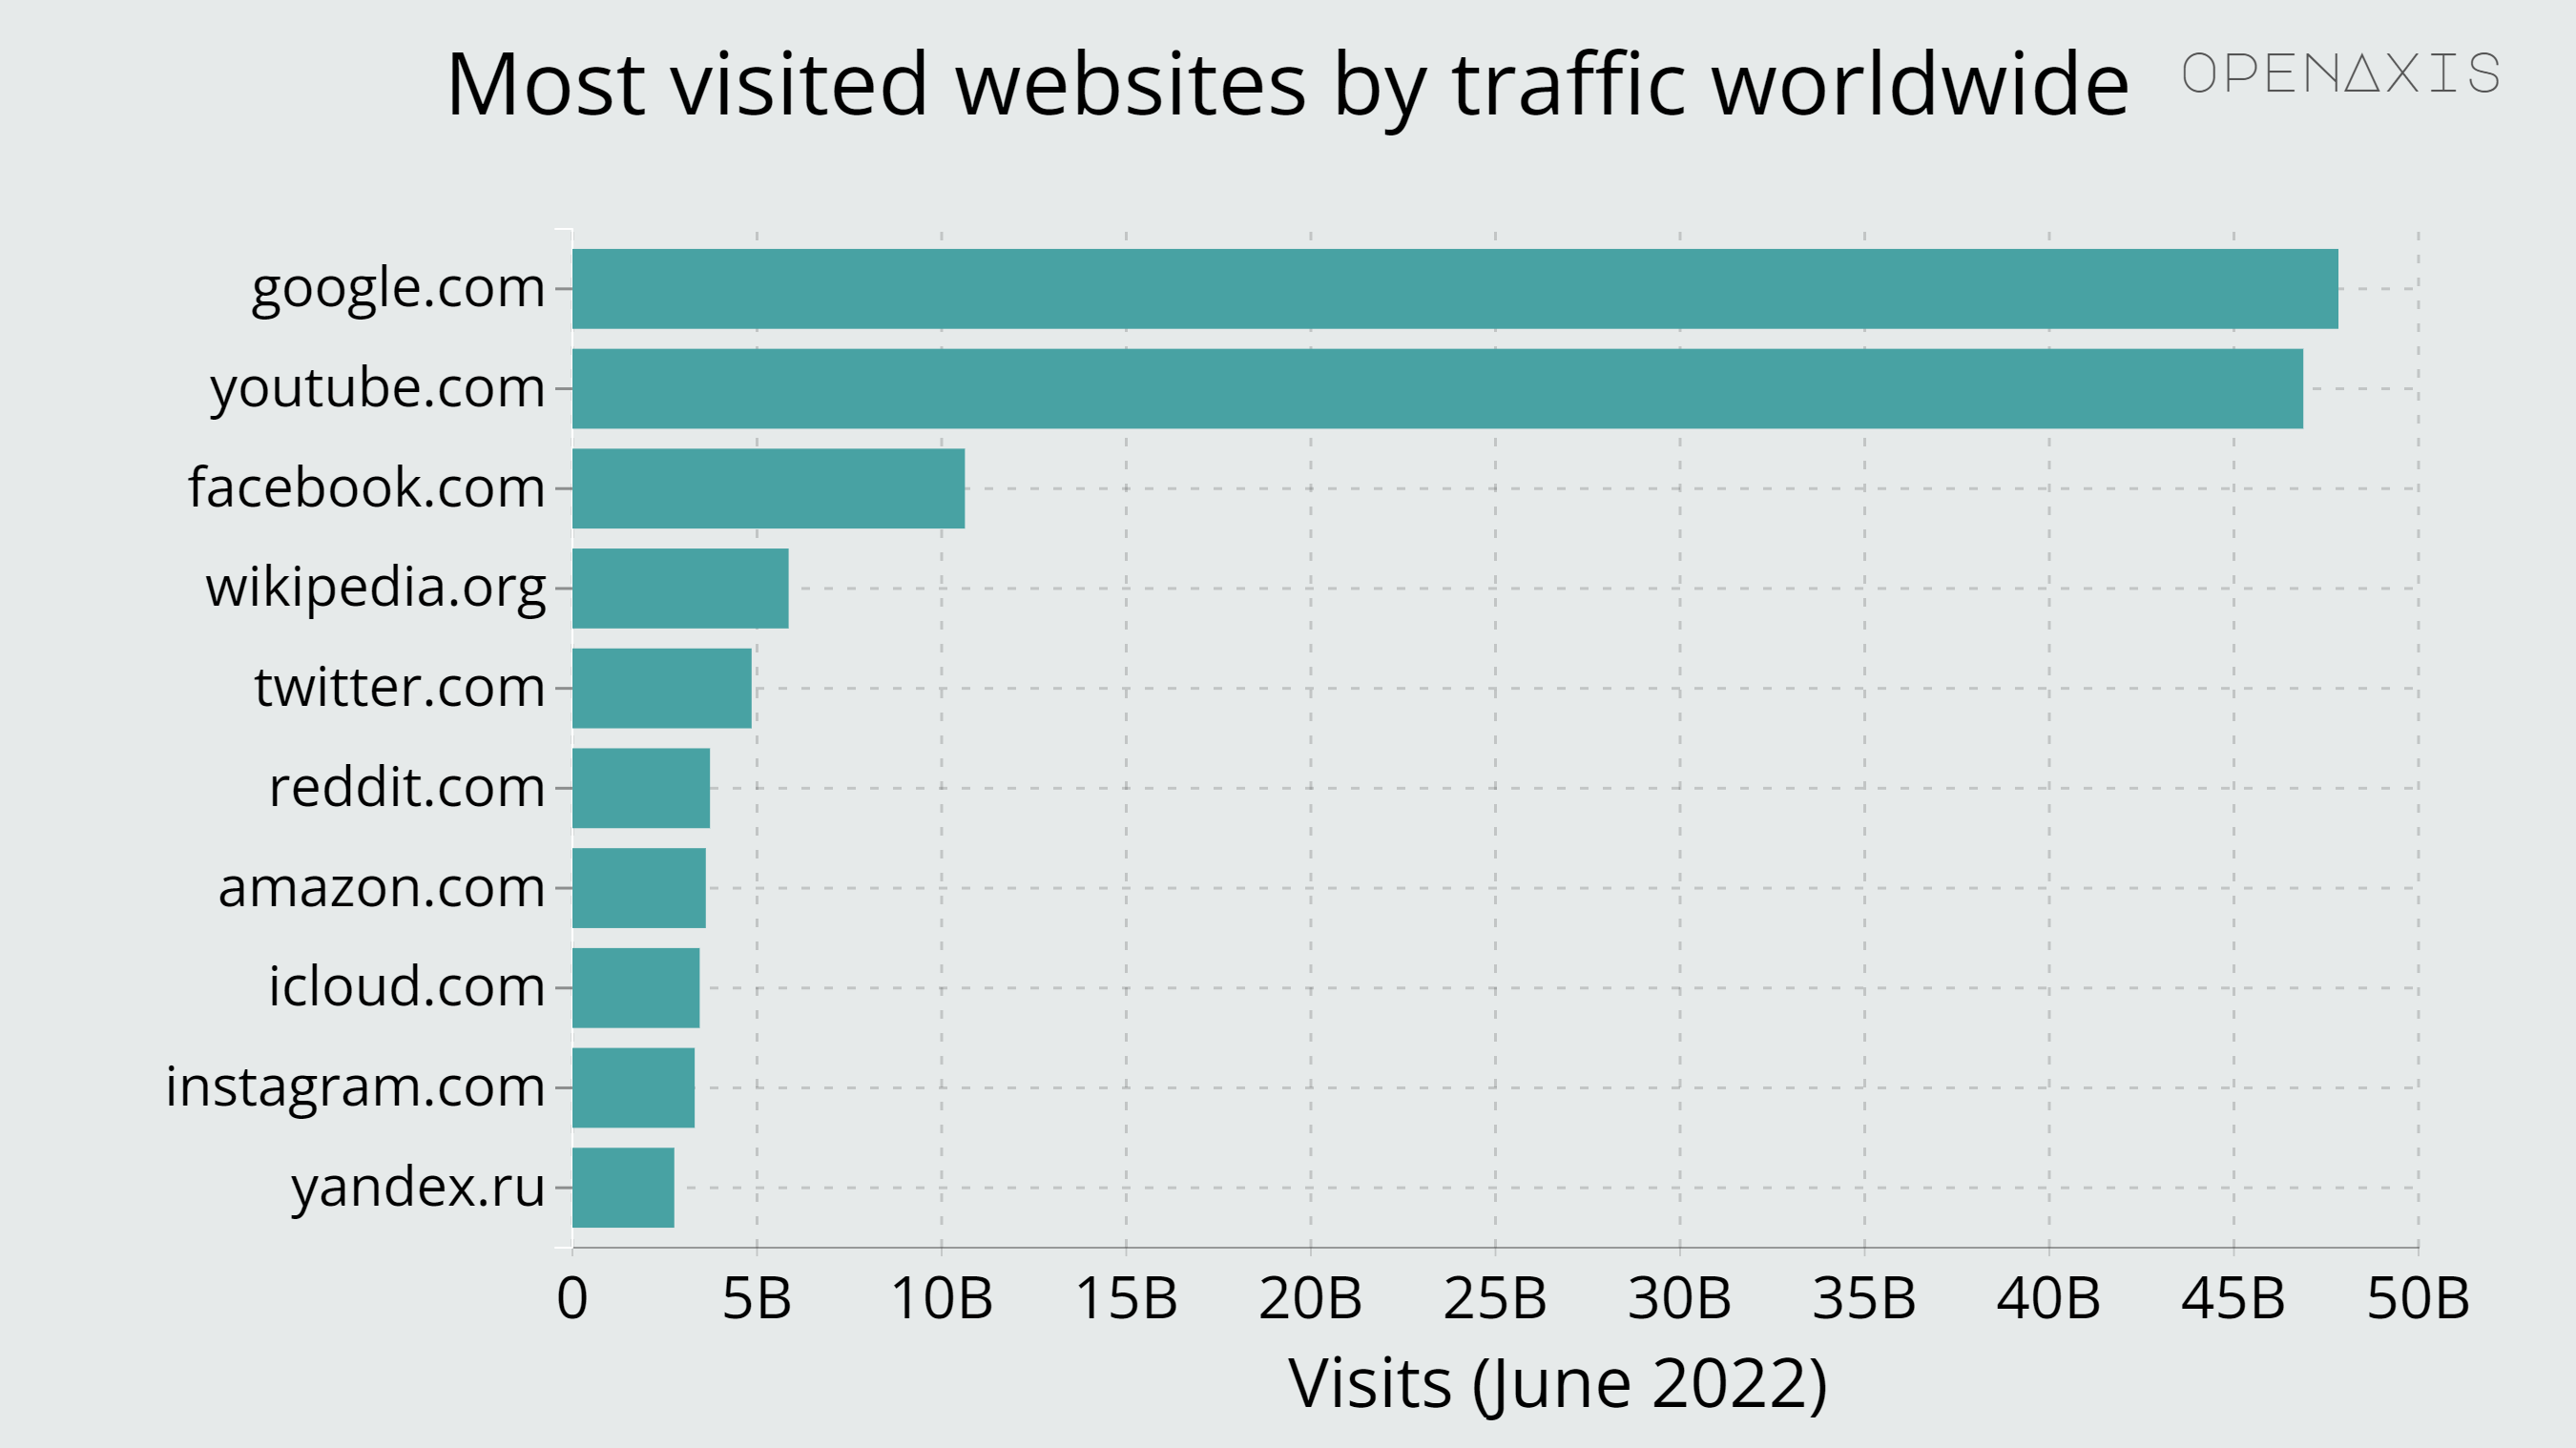 "Most visited websites by traffic worldwide"